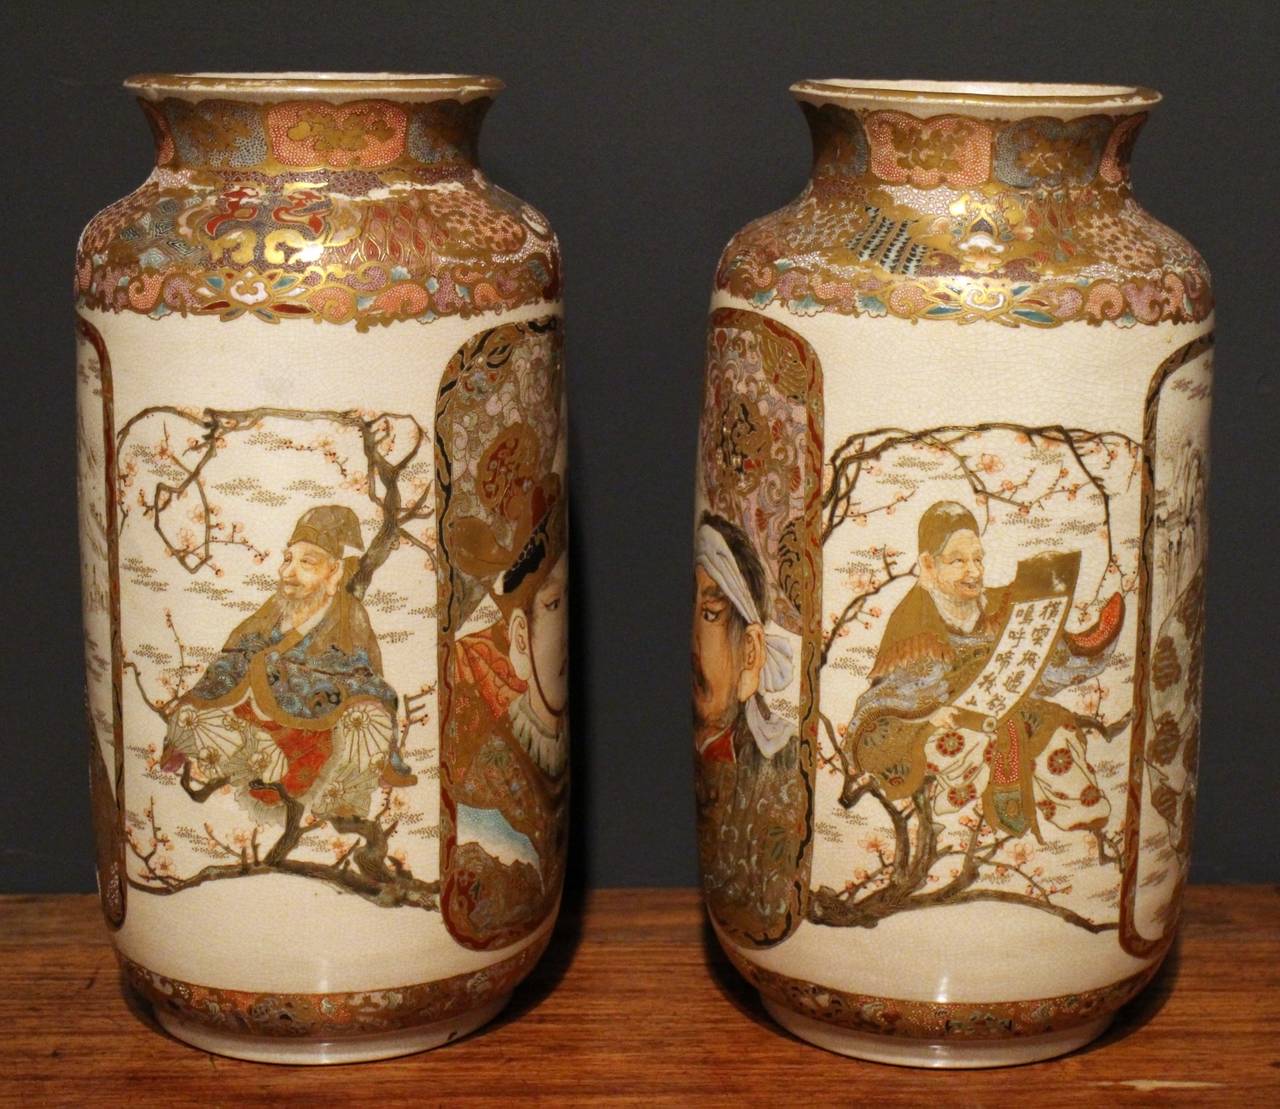 A pair of unusual Japanese Satsuma vases decorated with large portraits of Samurai warriors.

